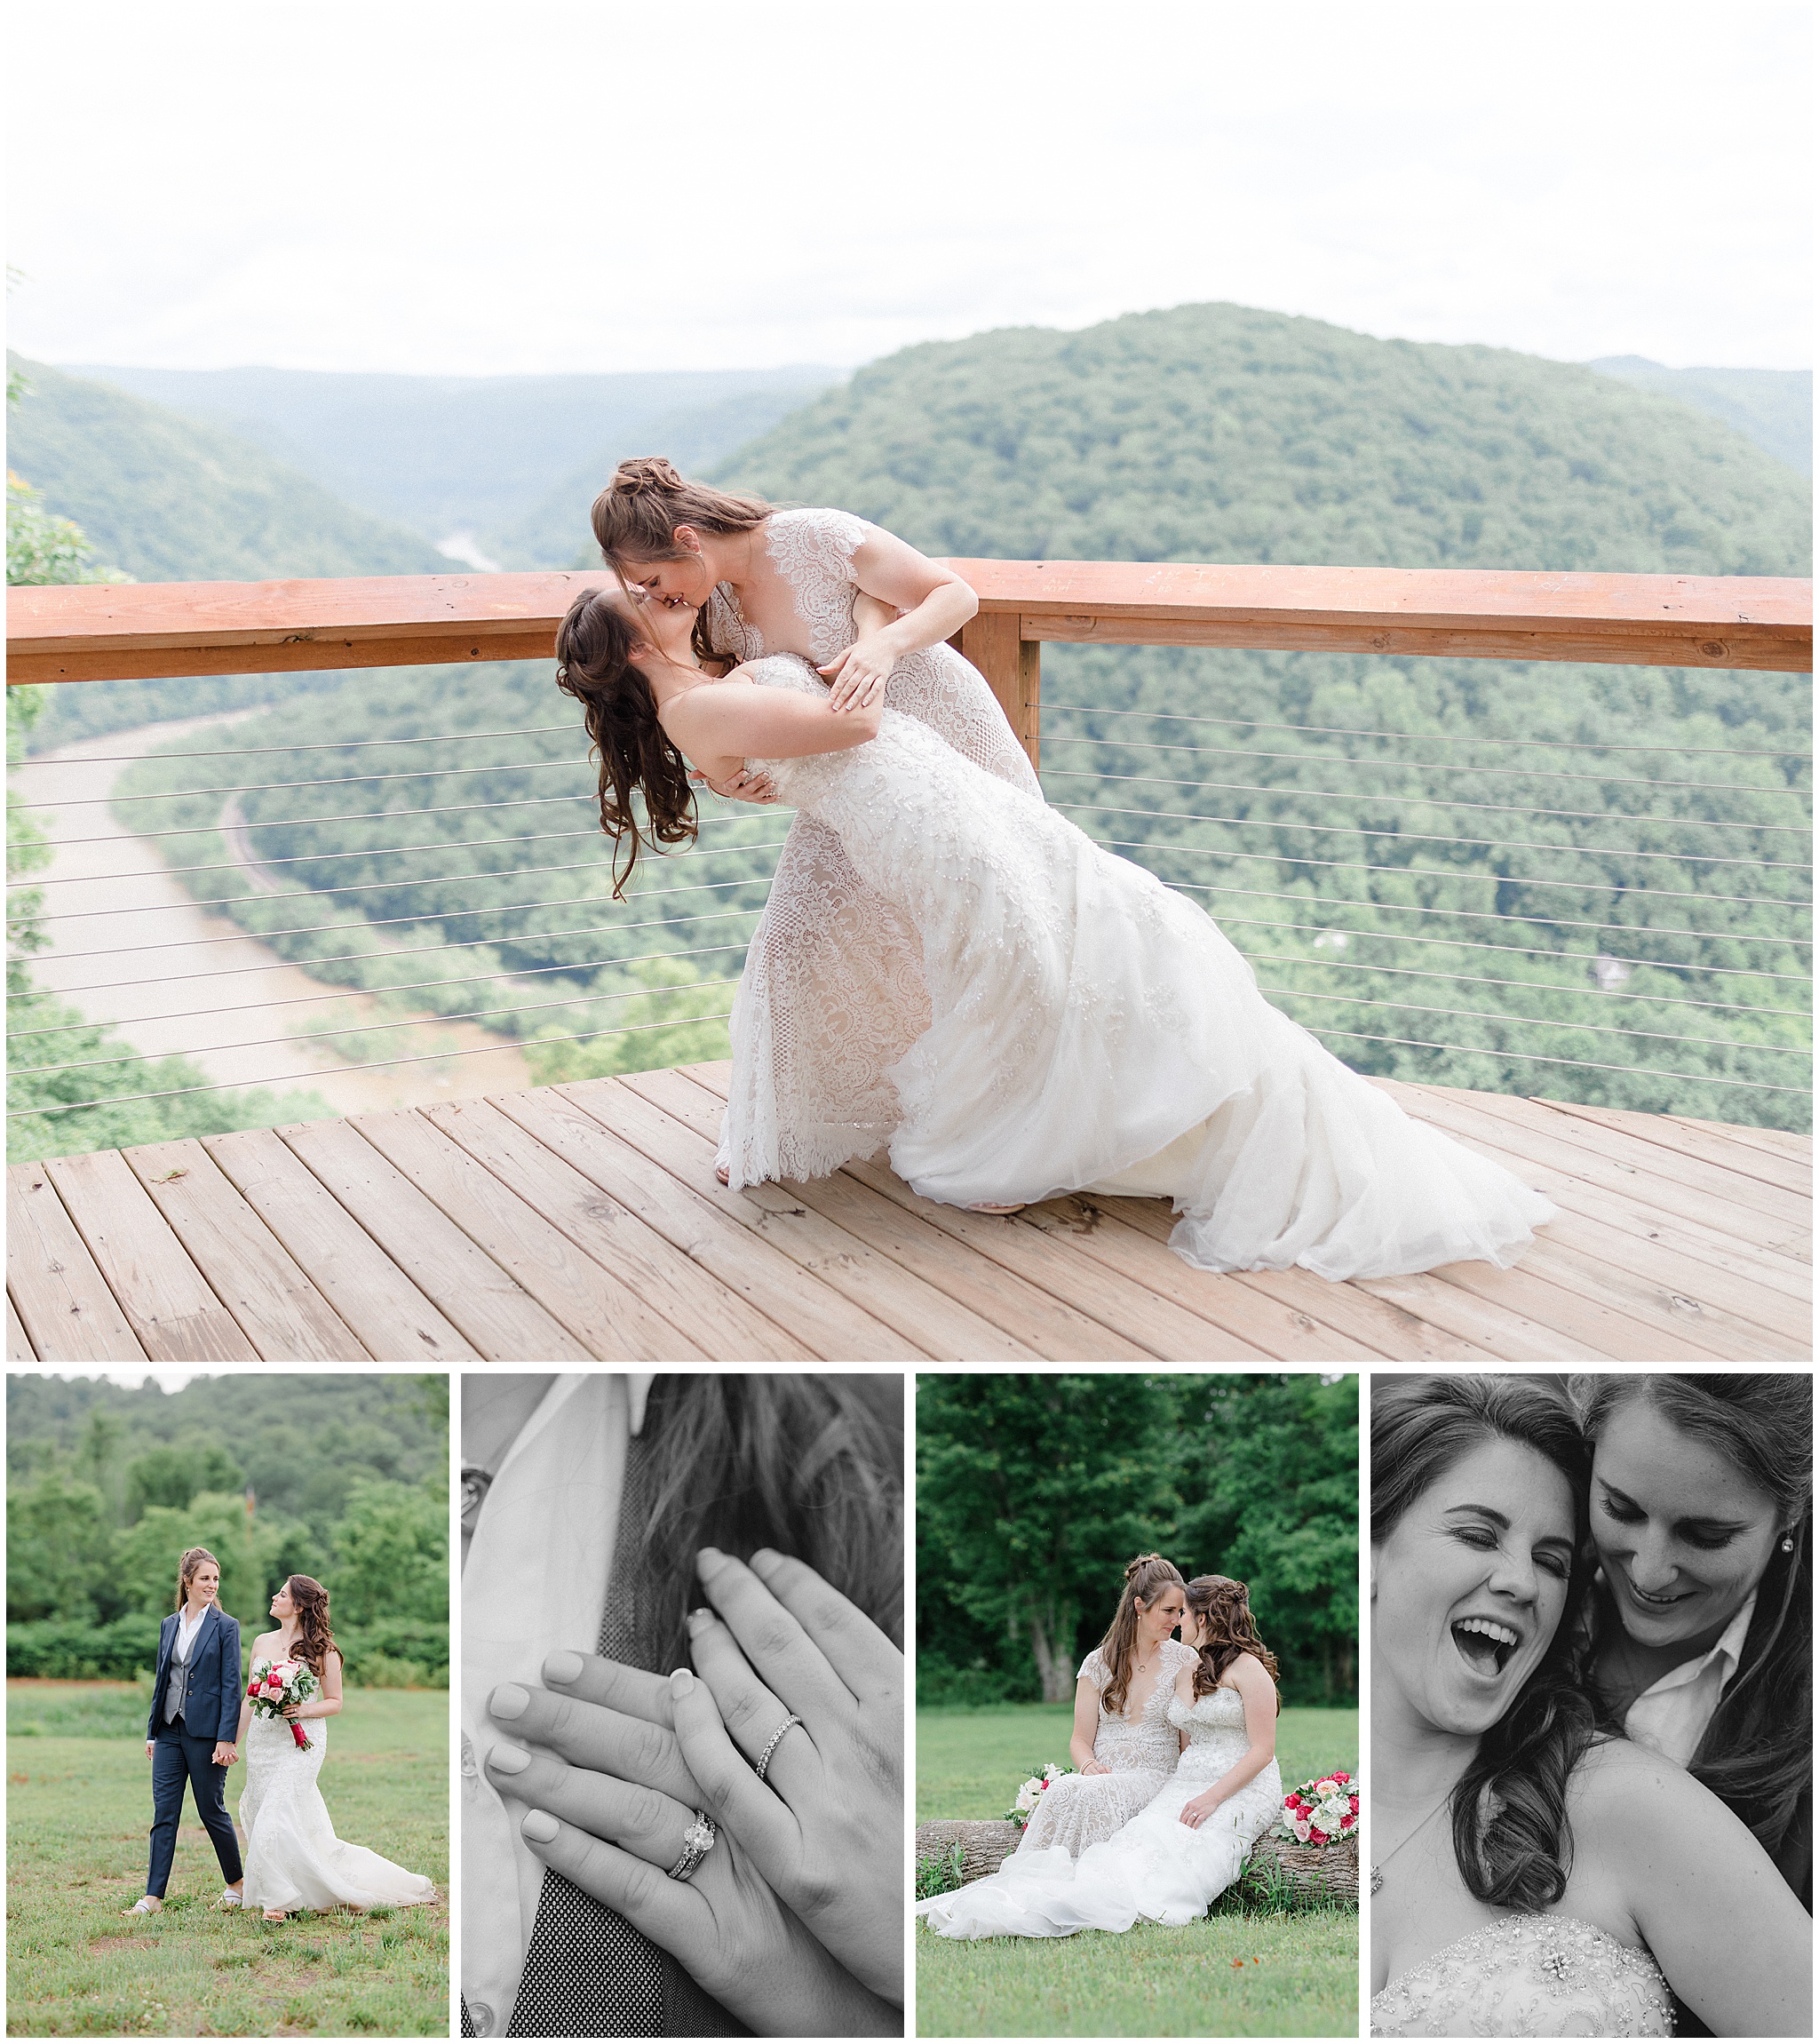 Cover image for Rachel and Alex's wild adventure wedding at Ace Adventure Resort in Oak Hill, WV